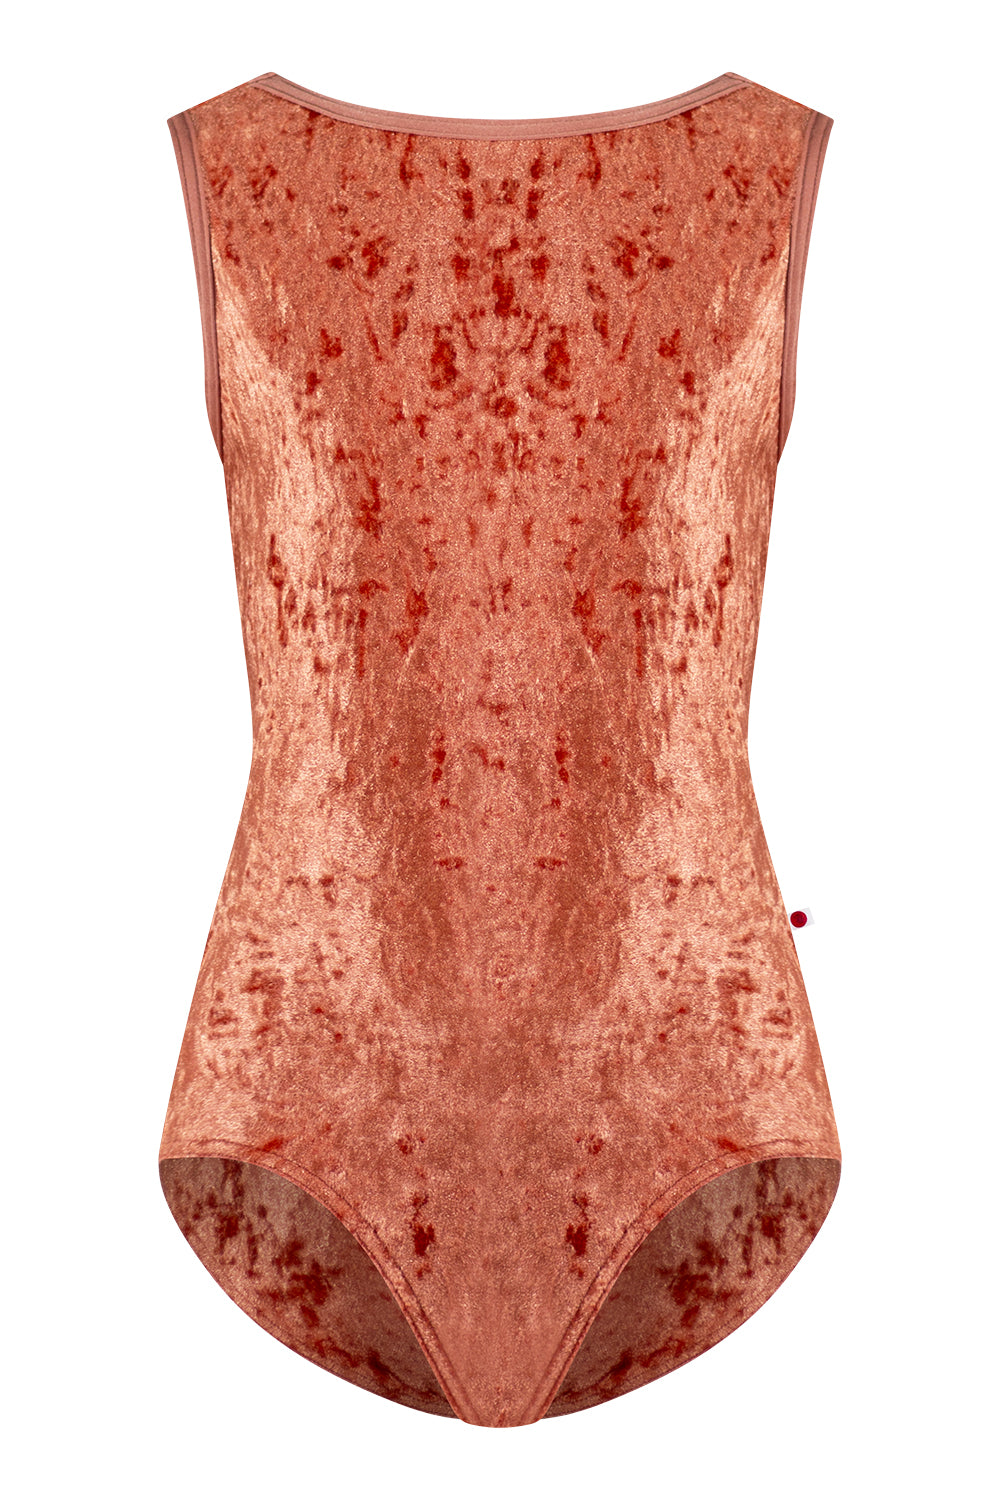 Kids Sofiane leotard in CV-Amaretto body color with N-Rosewood trim color